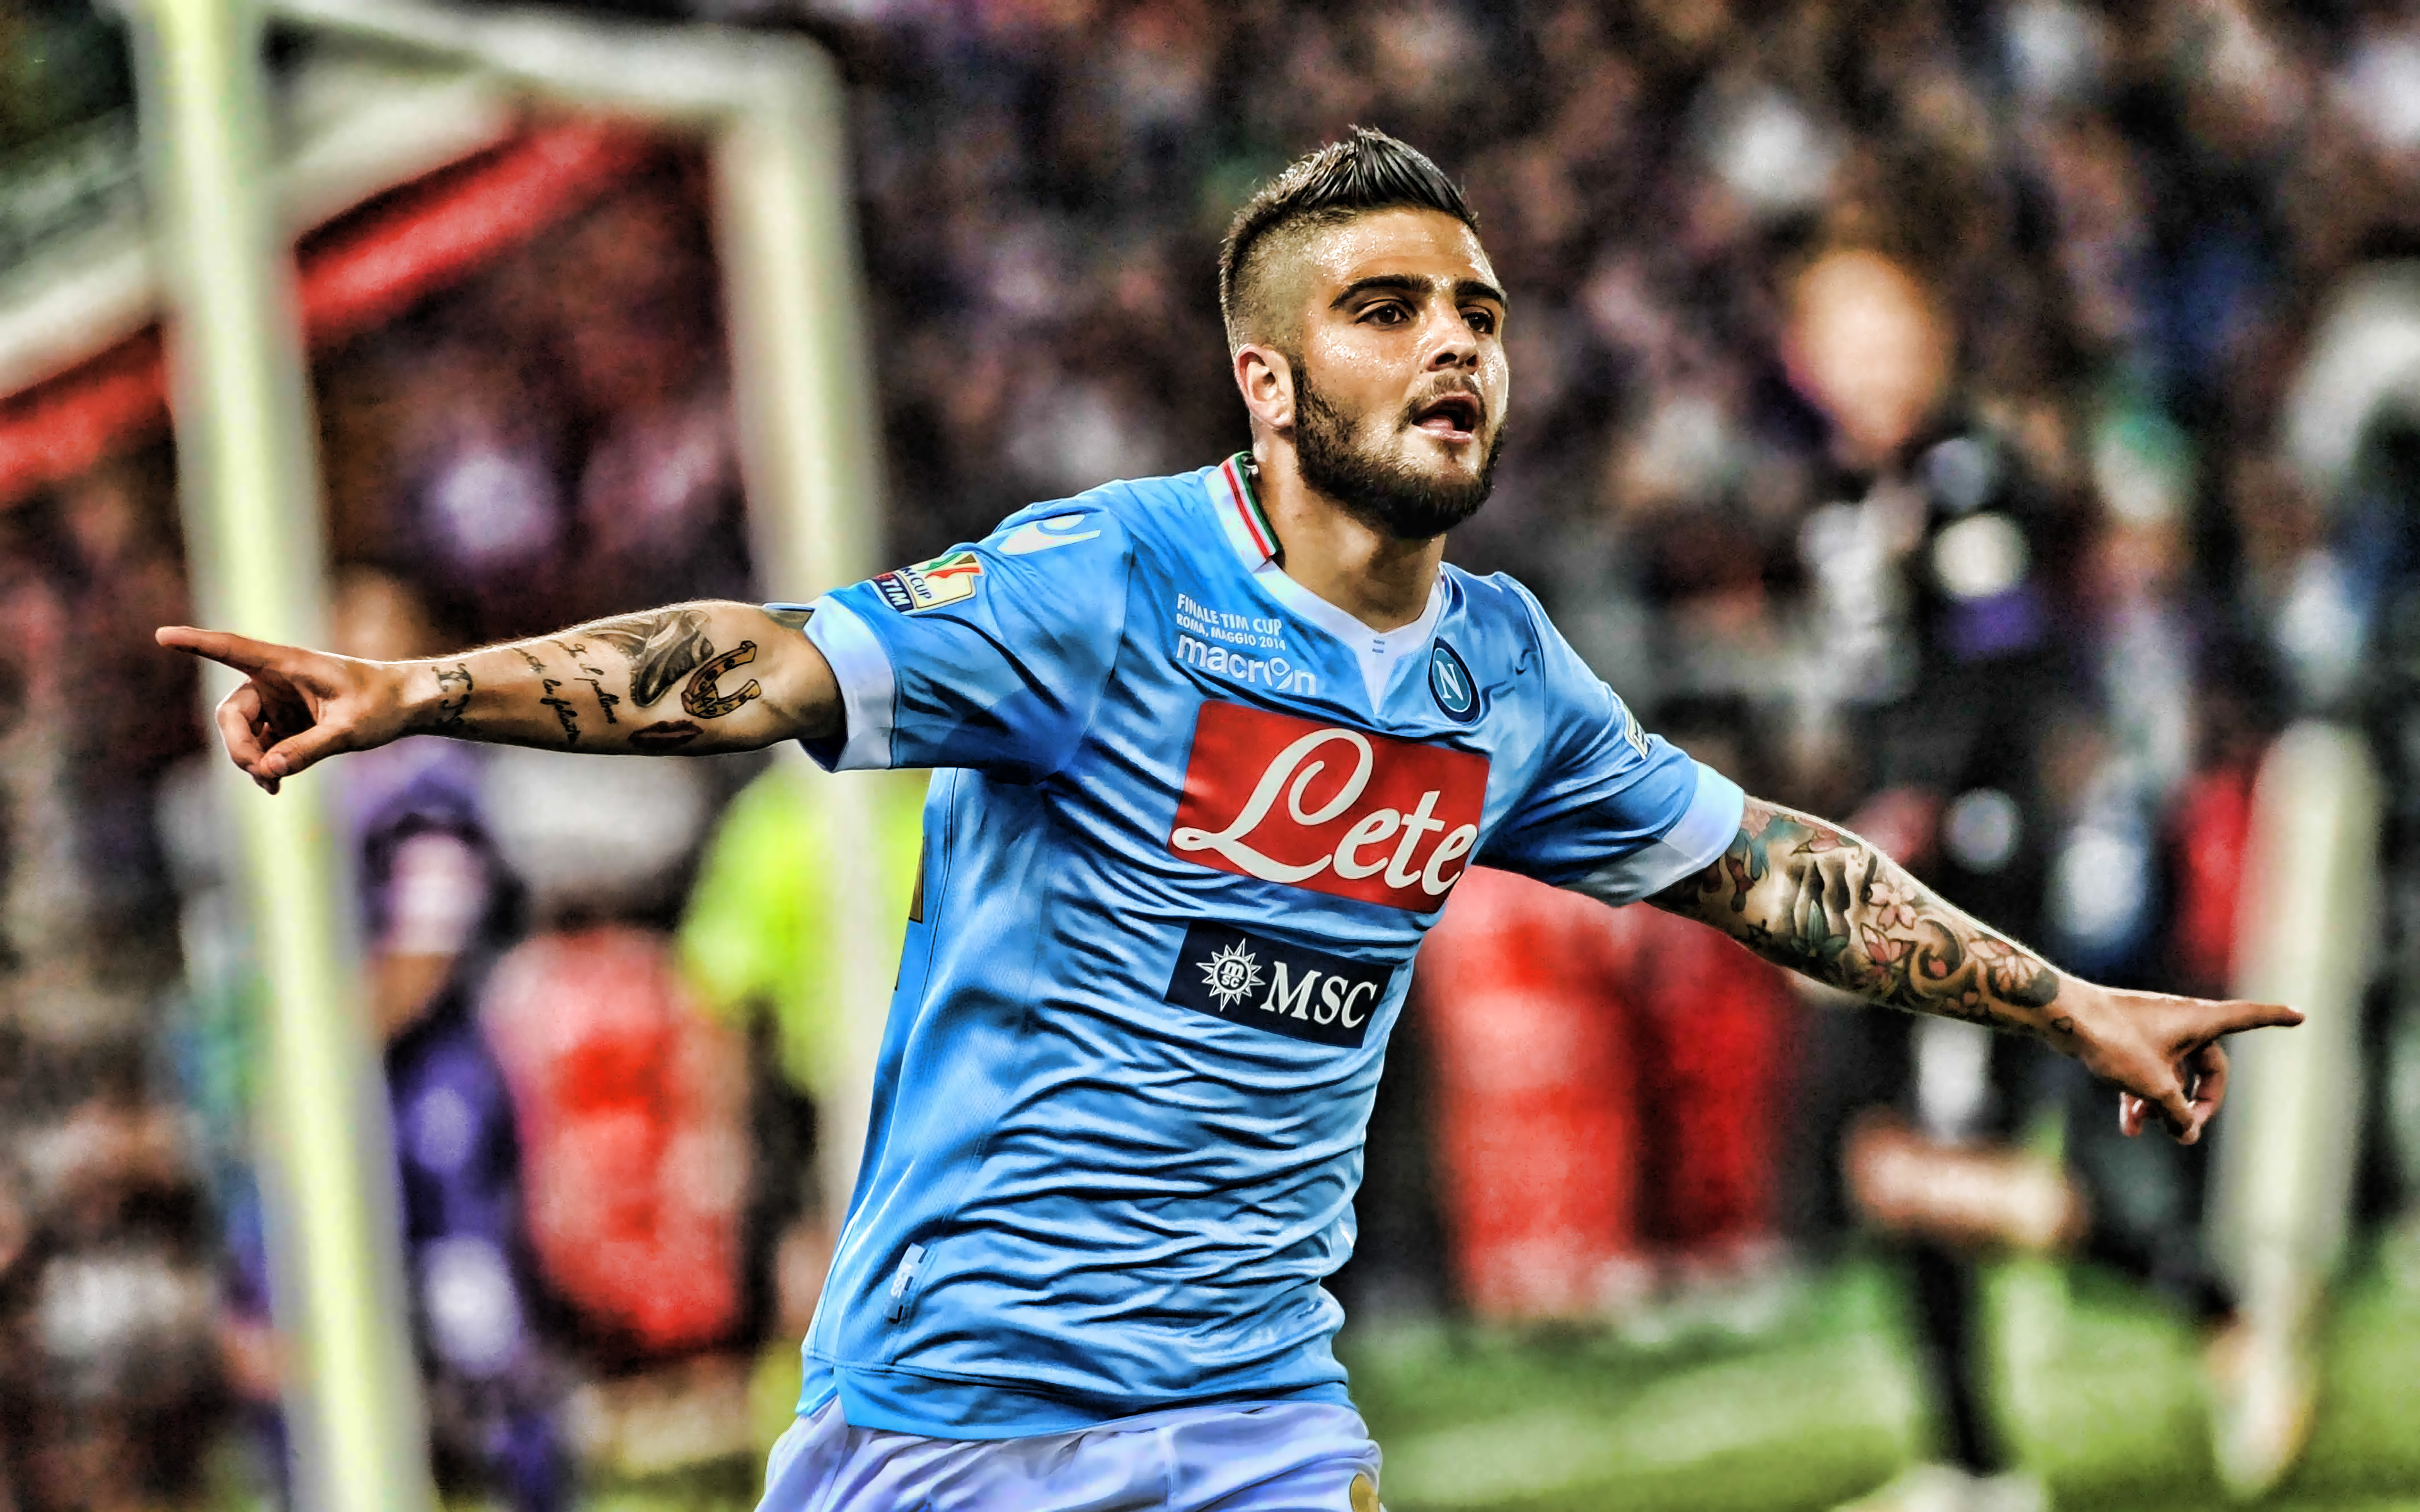 Insigne Wallpapers